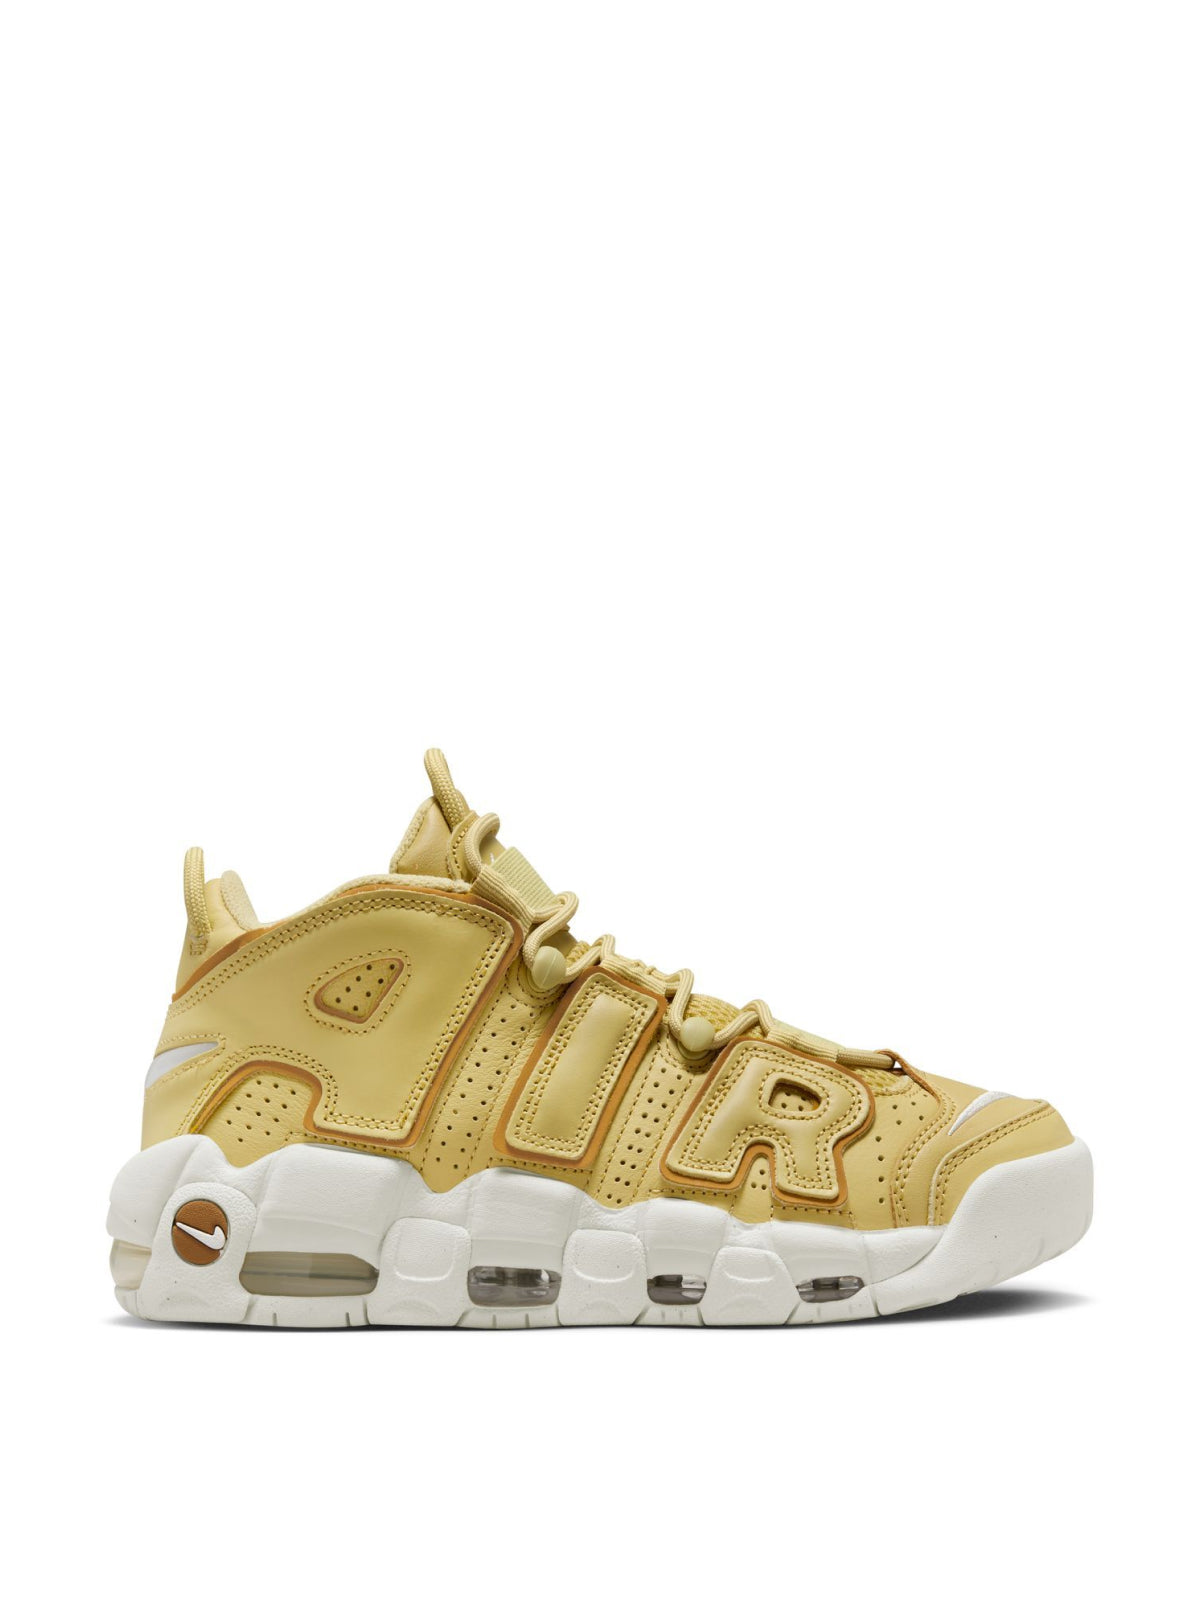 Nike-OUTLET-SALE-Air More Uptempo Sneakers-ARCHIVIST